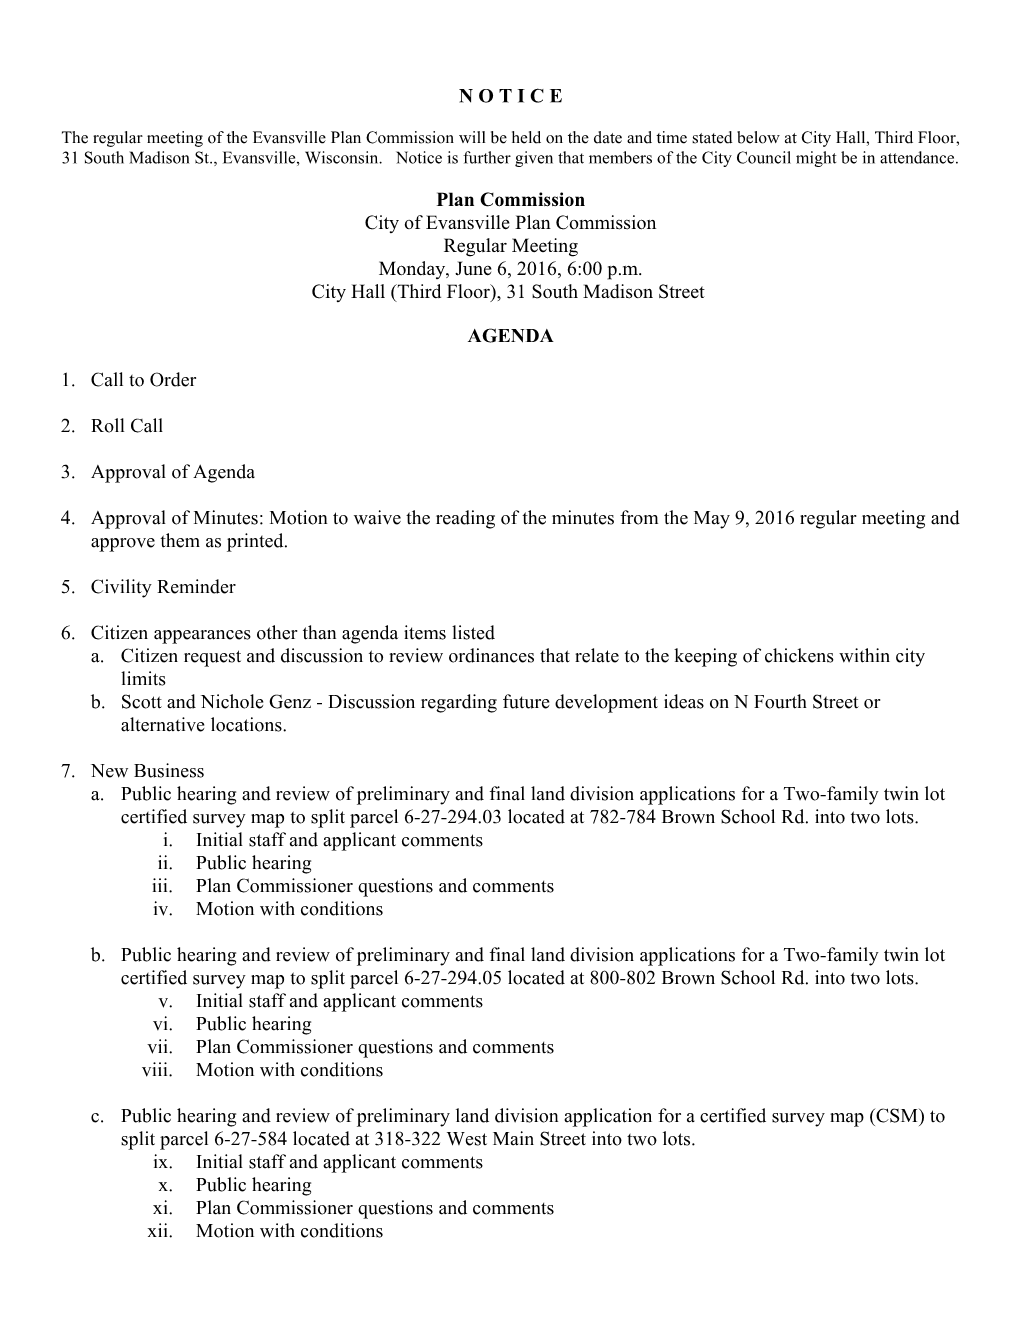 City of Evansville Plan Commission